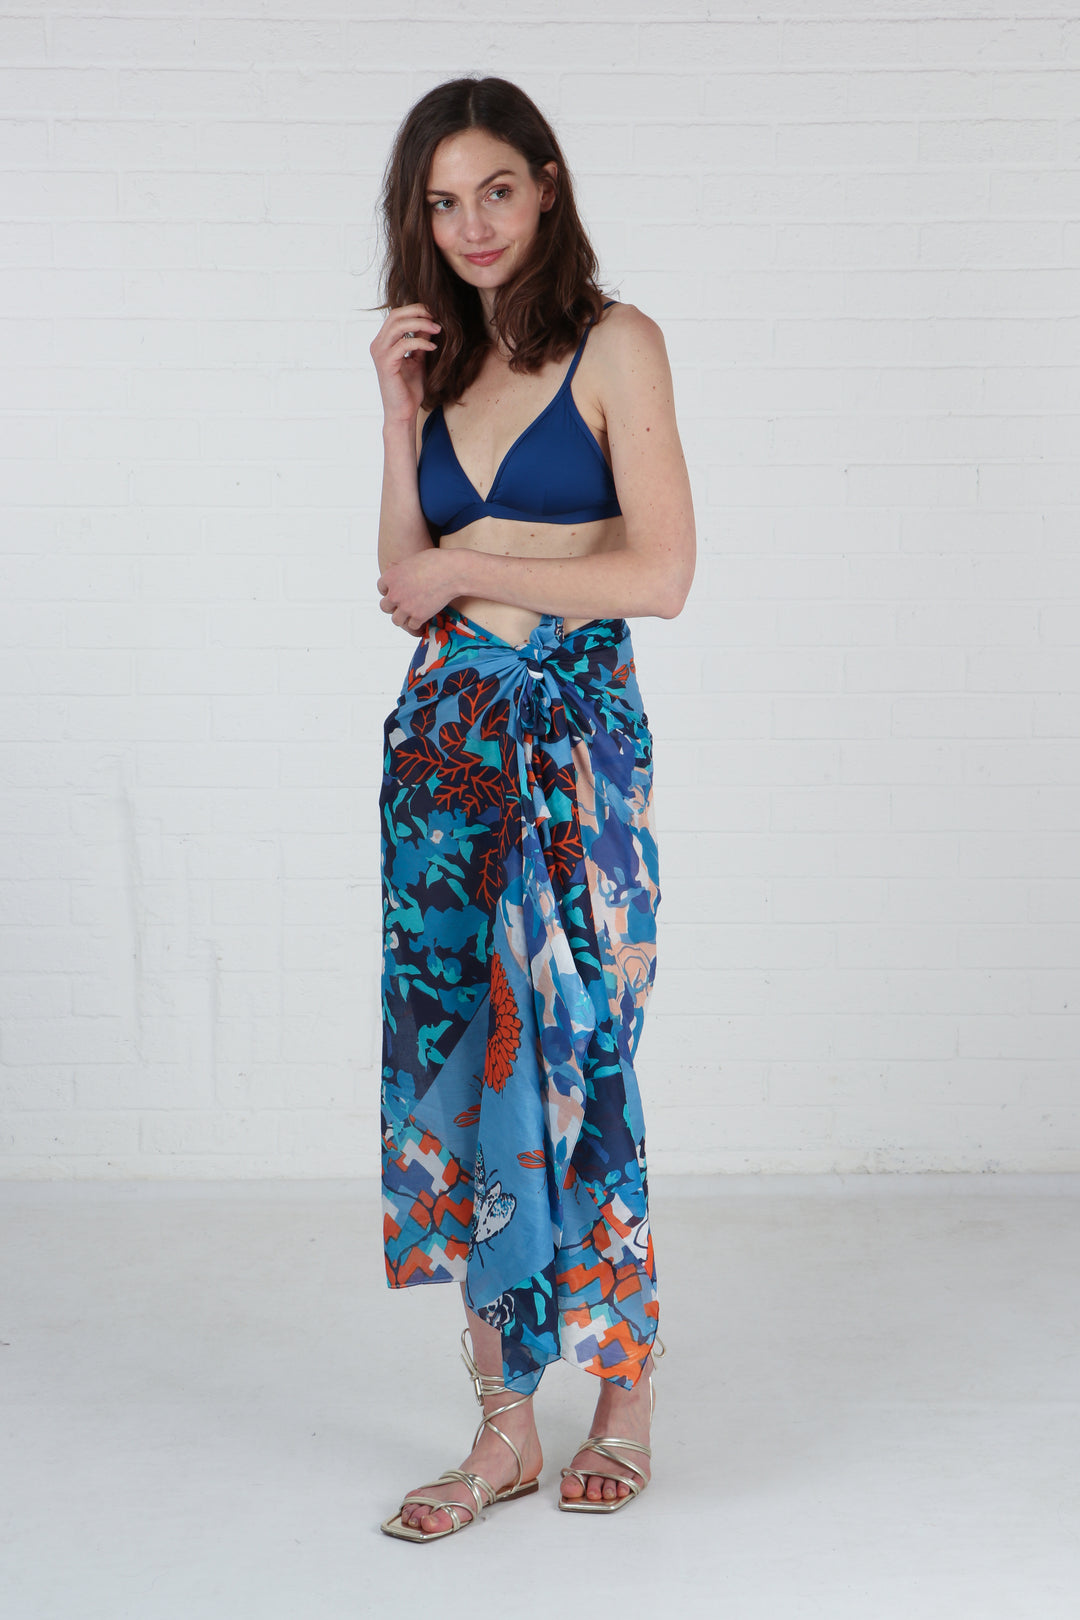 model wearing this blue cotton scarf as a beach coverup wrap